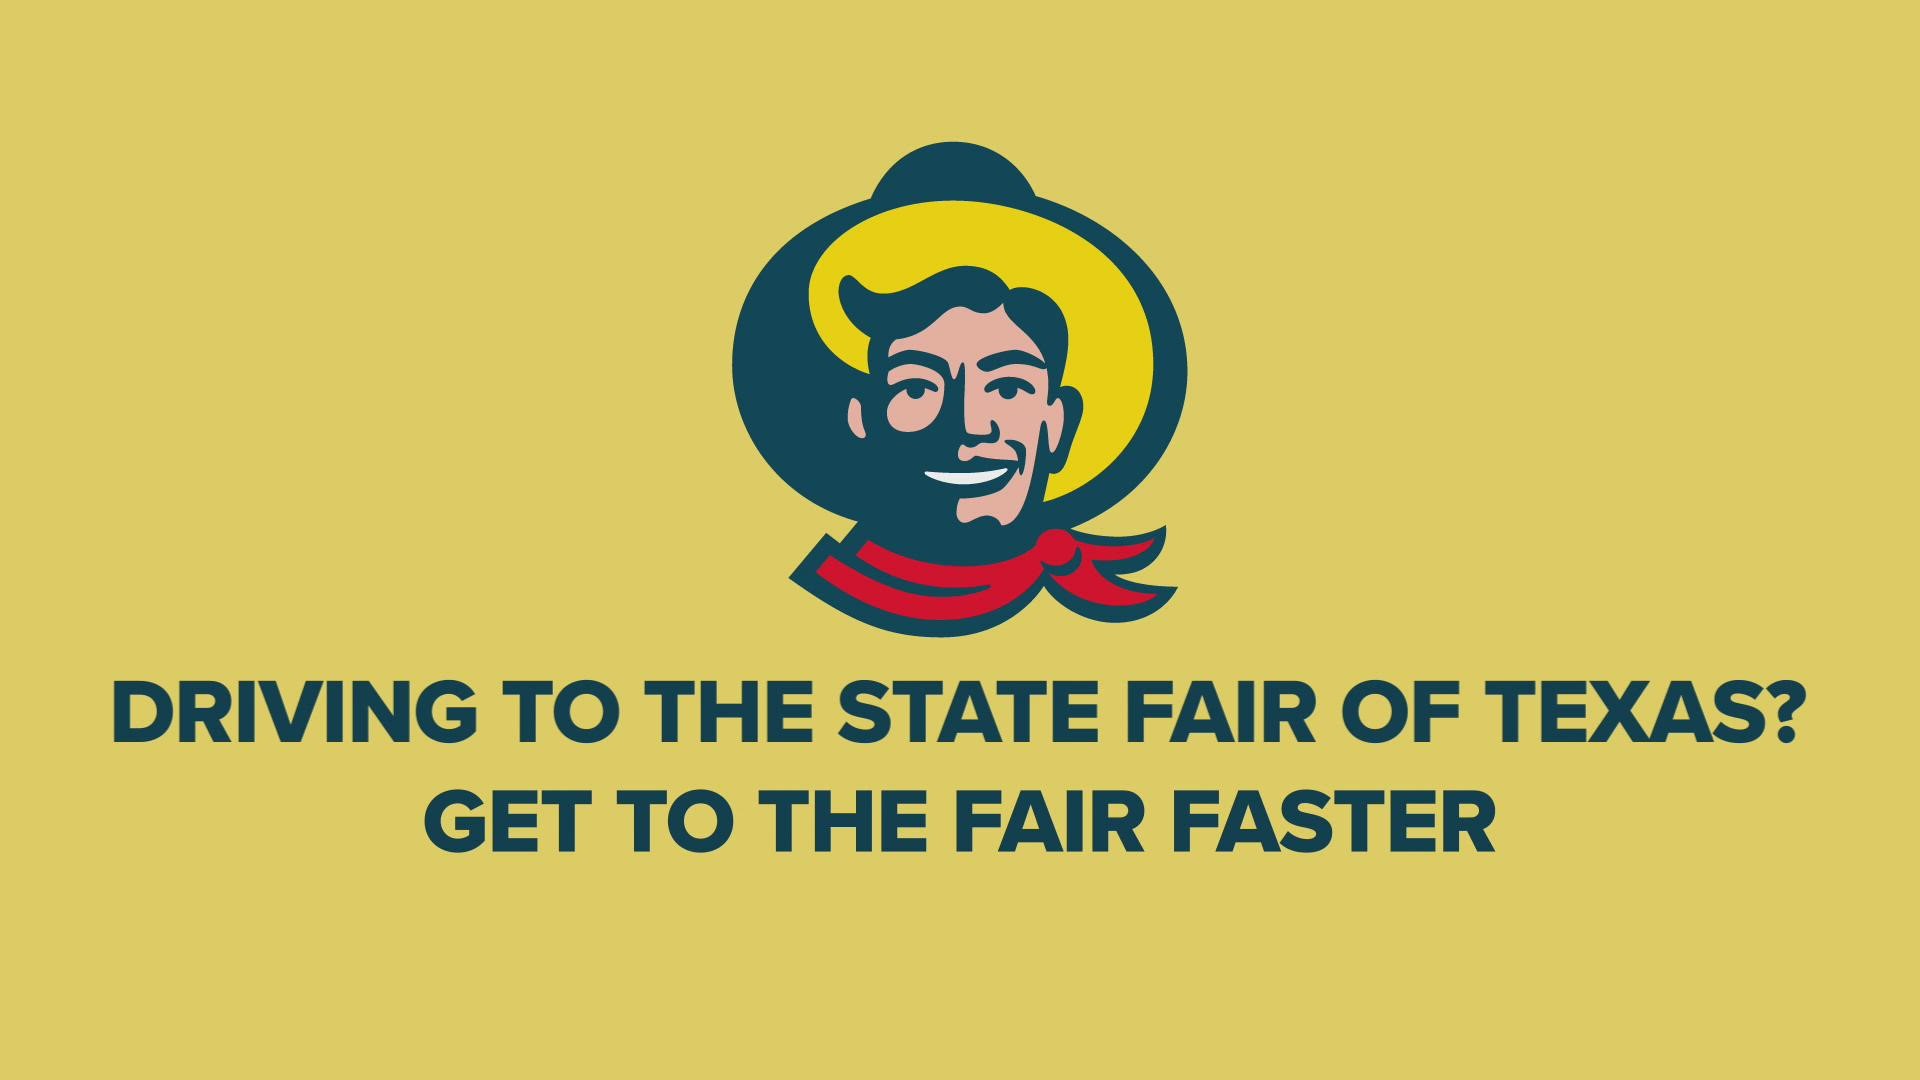 An essential driving tip to get to the State Fair of Texas... faster.